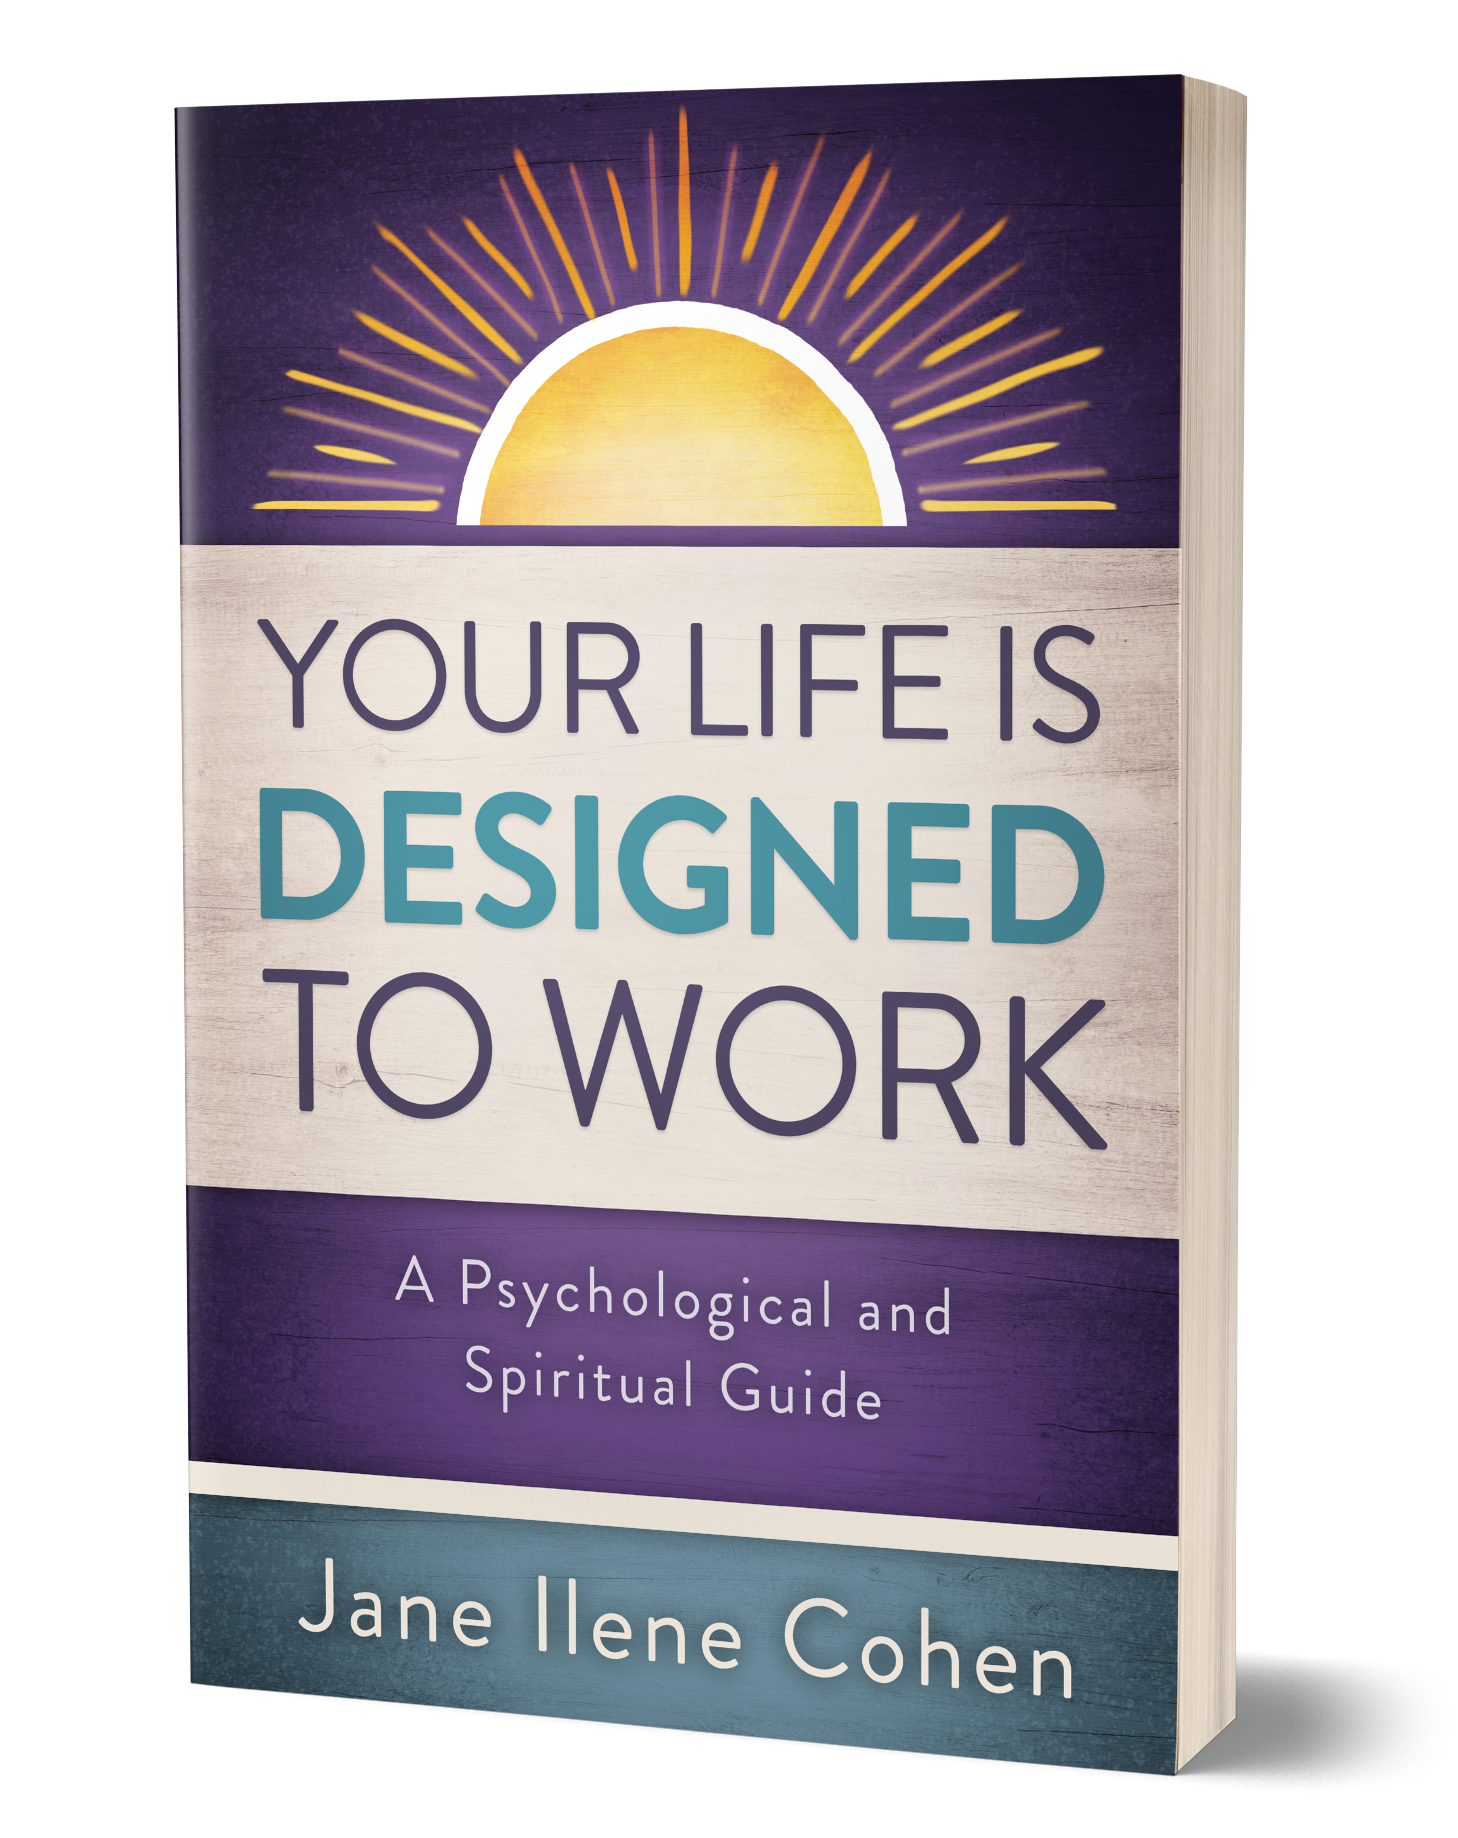 Moving Life Forward with Dr. Jane Ilene Cohen's Transformative New Book, Your Life is Designed to Work